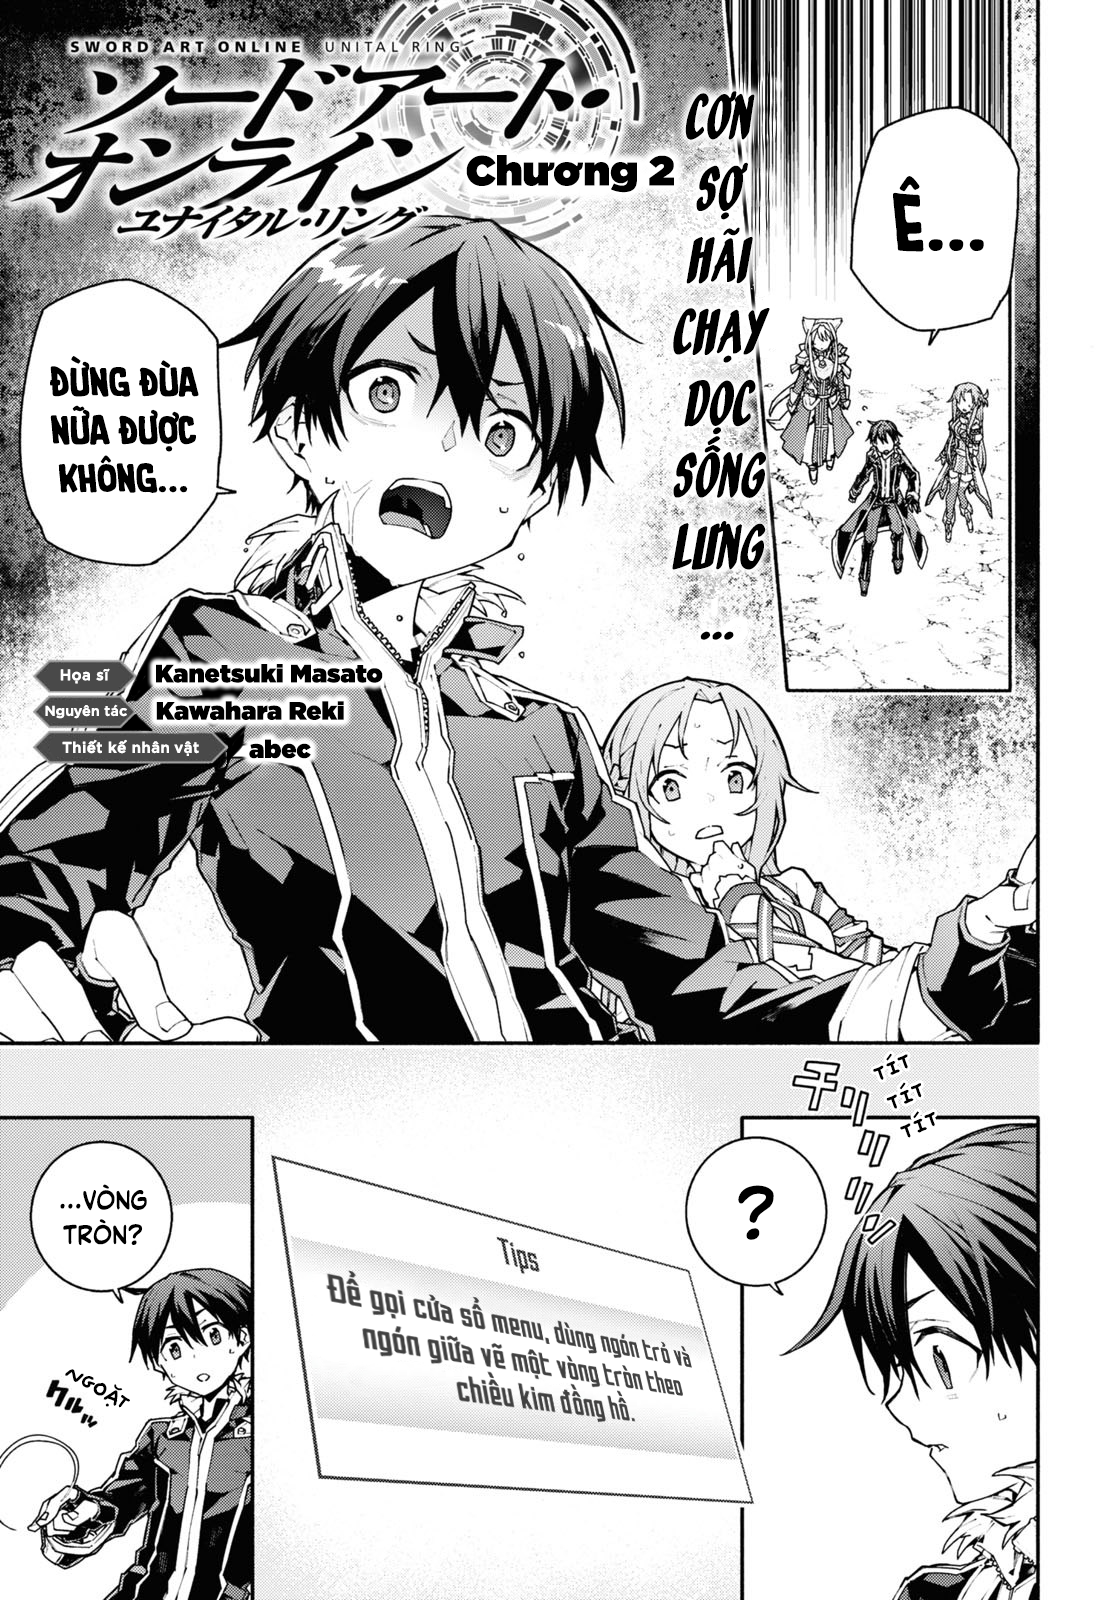 For those of you who have been reading Unital Ring, how has the arc been?  Have you enjoyed it? How does it compared to other arcs in the series? :  r/swordartonline